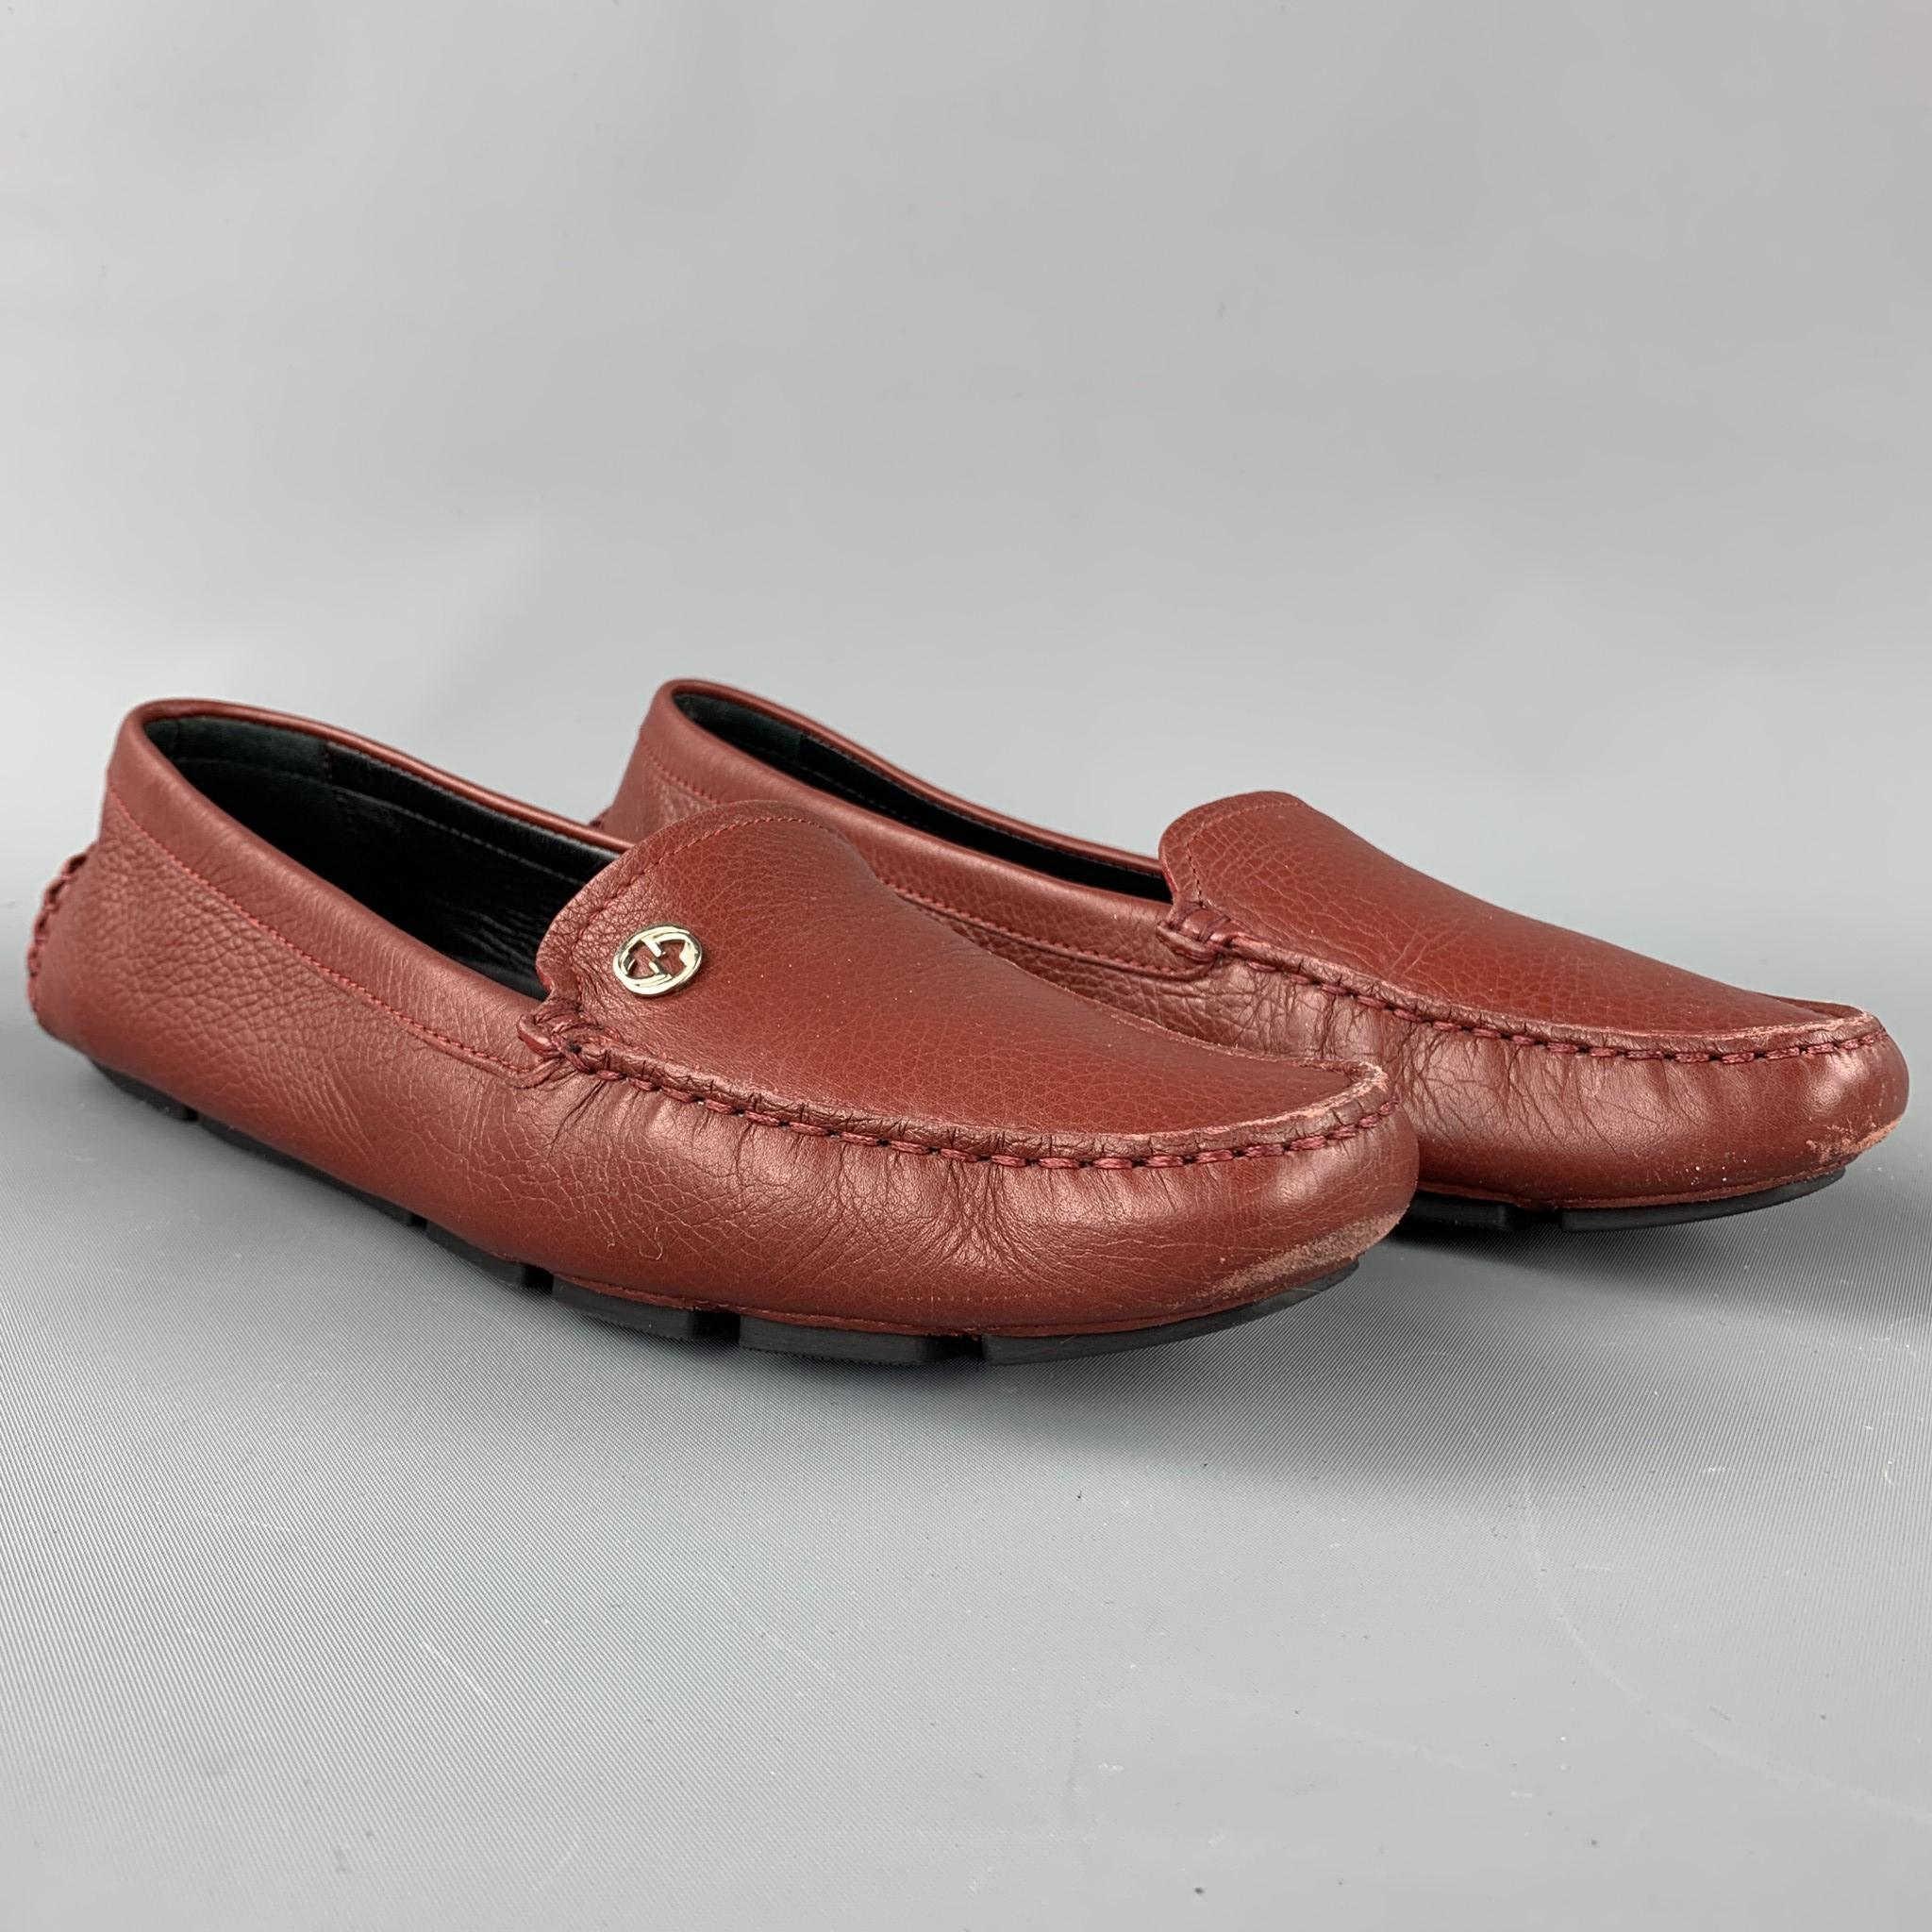 GUCCI loafers comes in a brick red pebble grain leather with a gold toned logo detail featuring a driver style. Made in Italy.

Excellent Pre-Owned Condition.
Marked: EU 38 G
Original Retail Price: $595.00

Outsole:

10 in. x 3 in. 